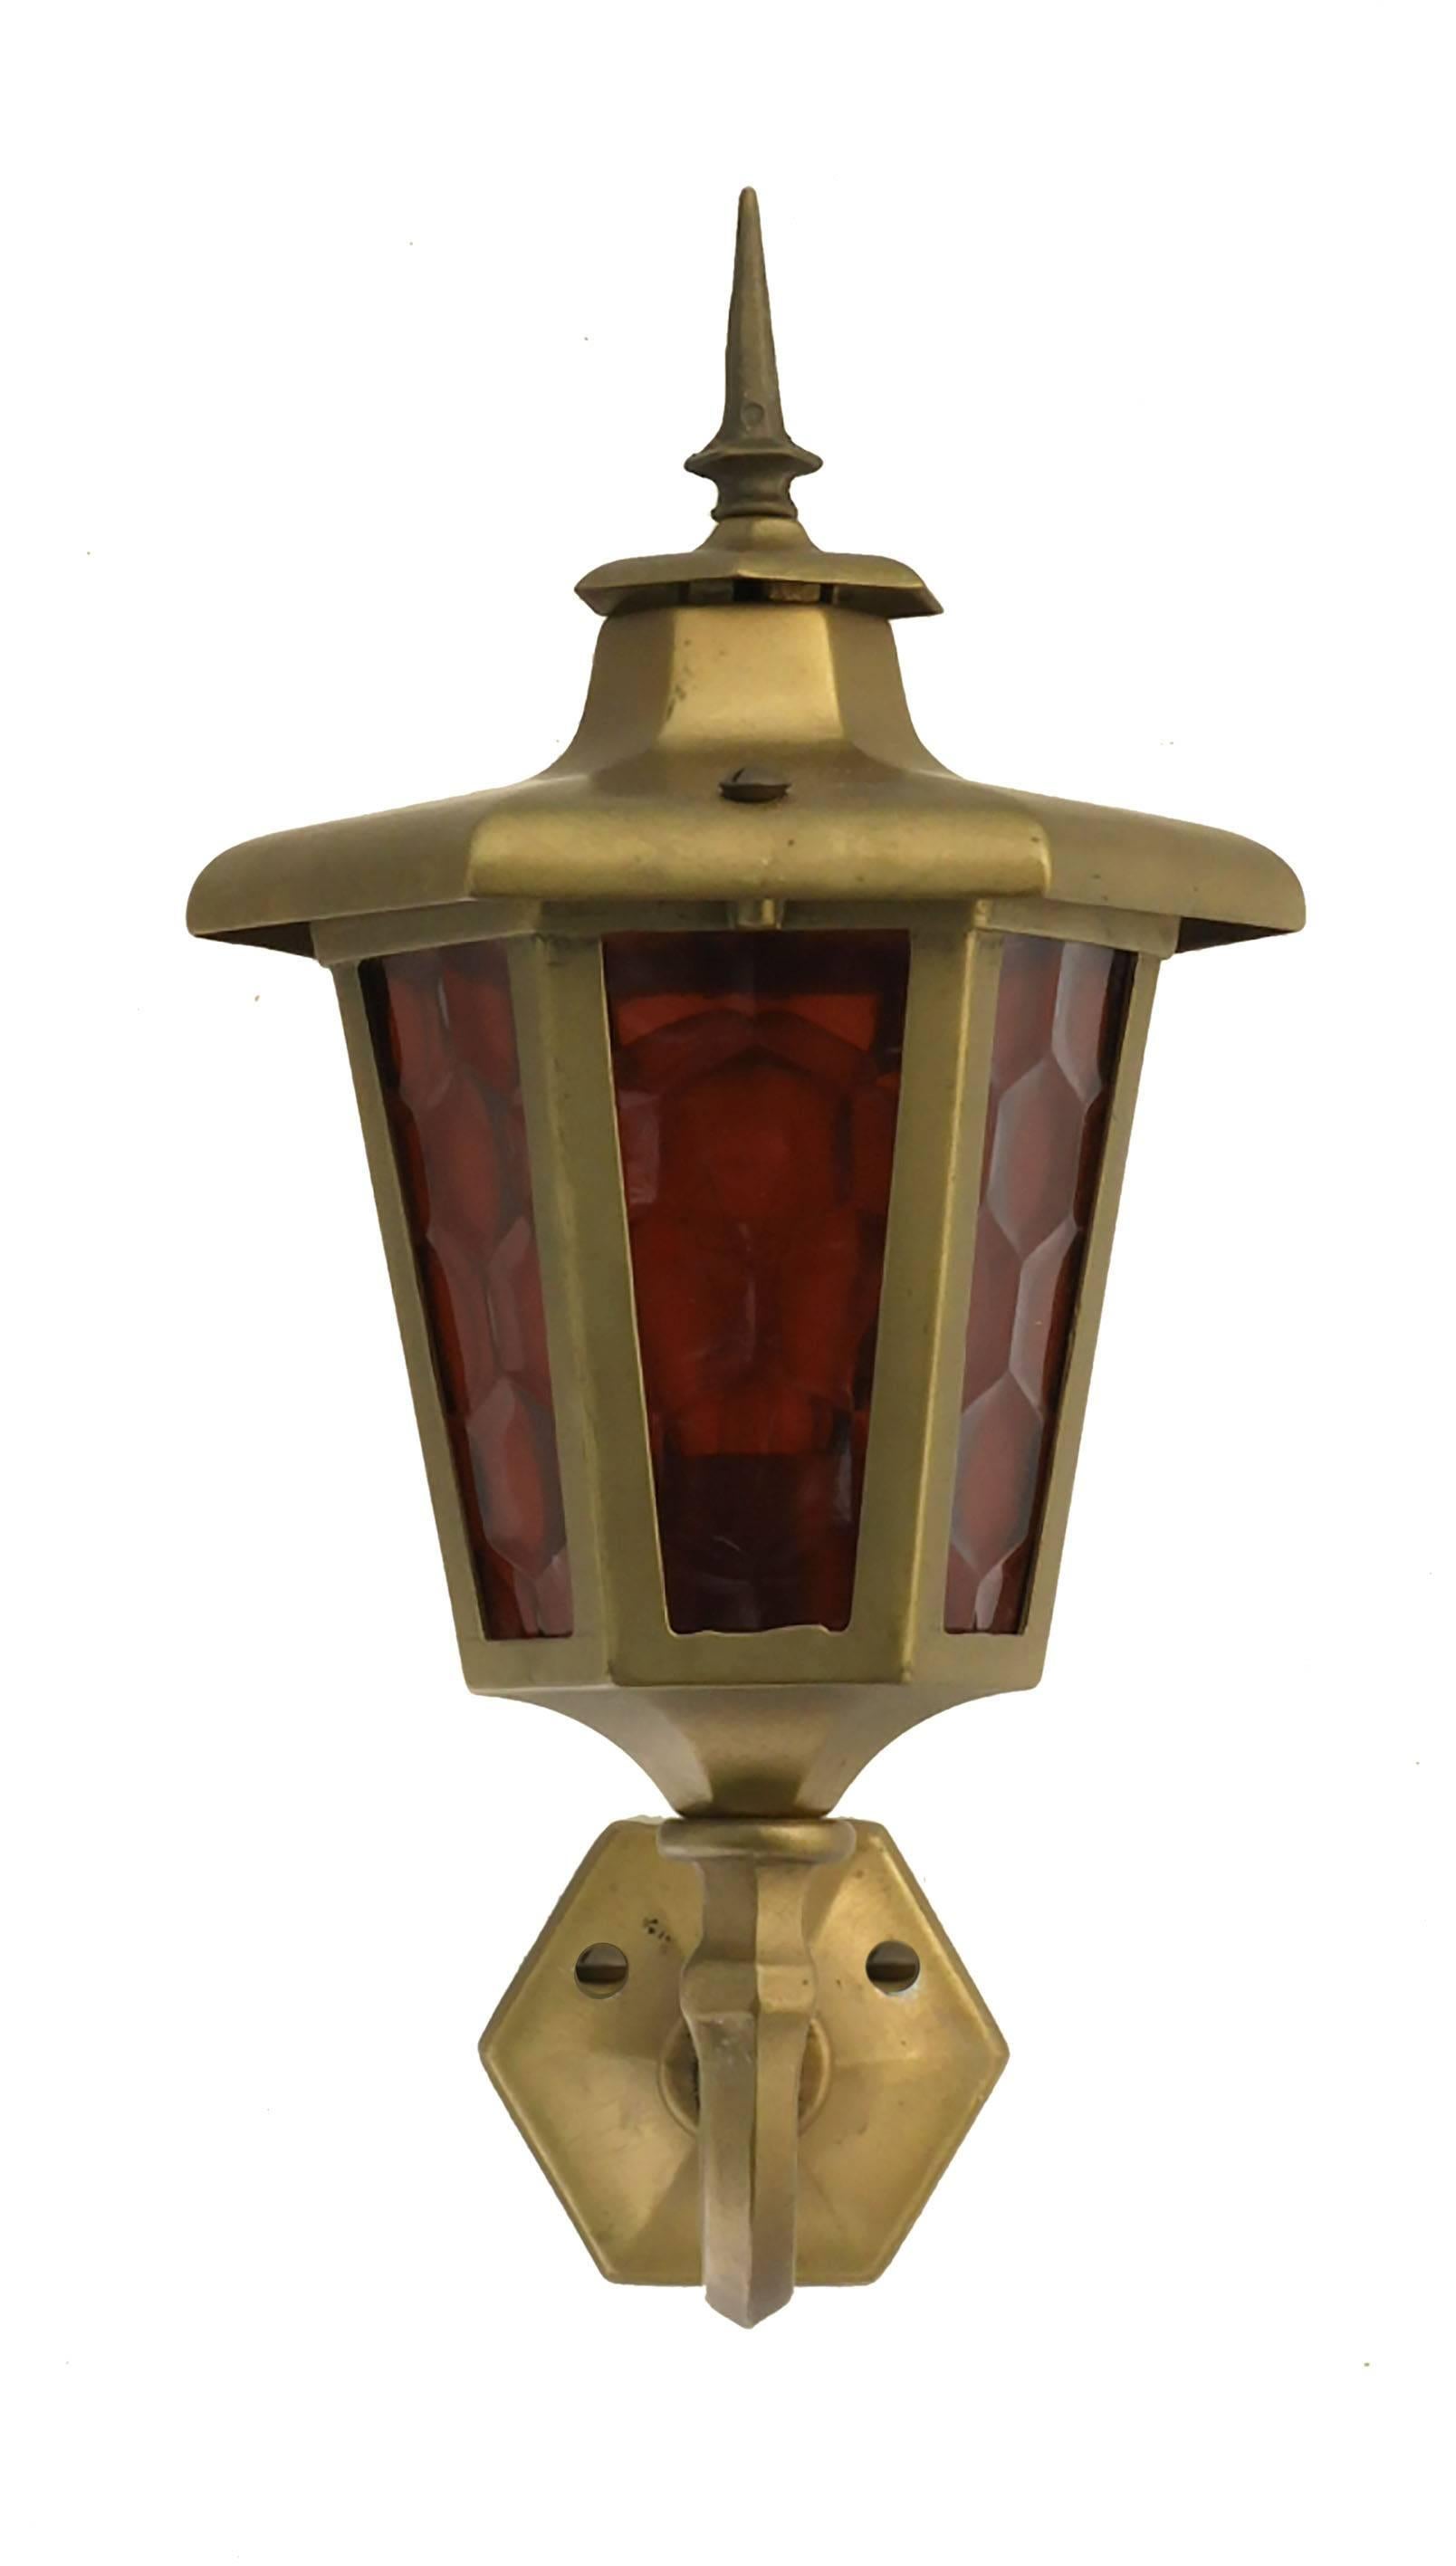 Exterior lantern porch light mid-20th century
Mat lacquered brass could be cleaned to shine if preferred
Honeycomb faceted Lucite panes easily replaced with a different glass
In good original condition good patina
The top has a cleaned patch not